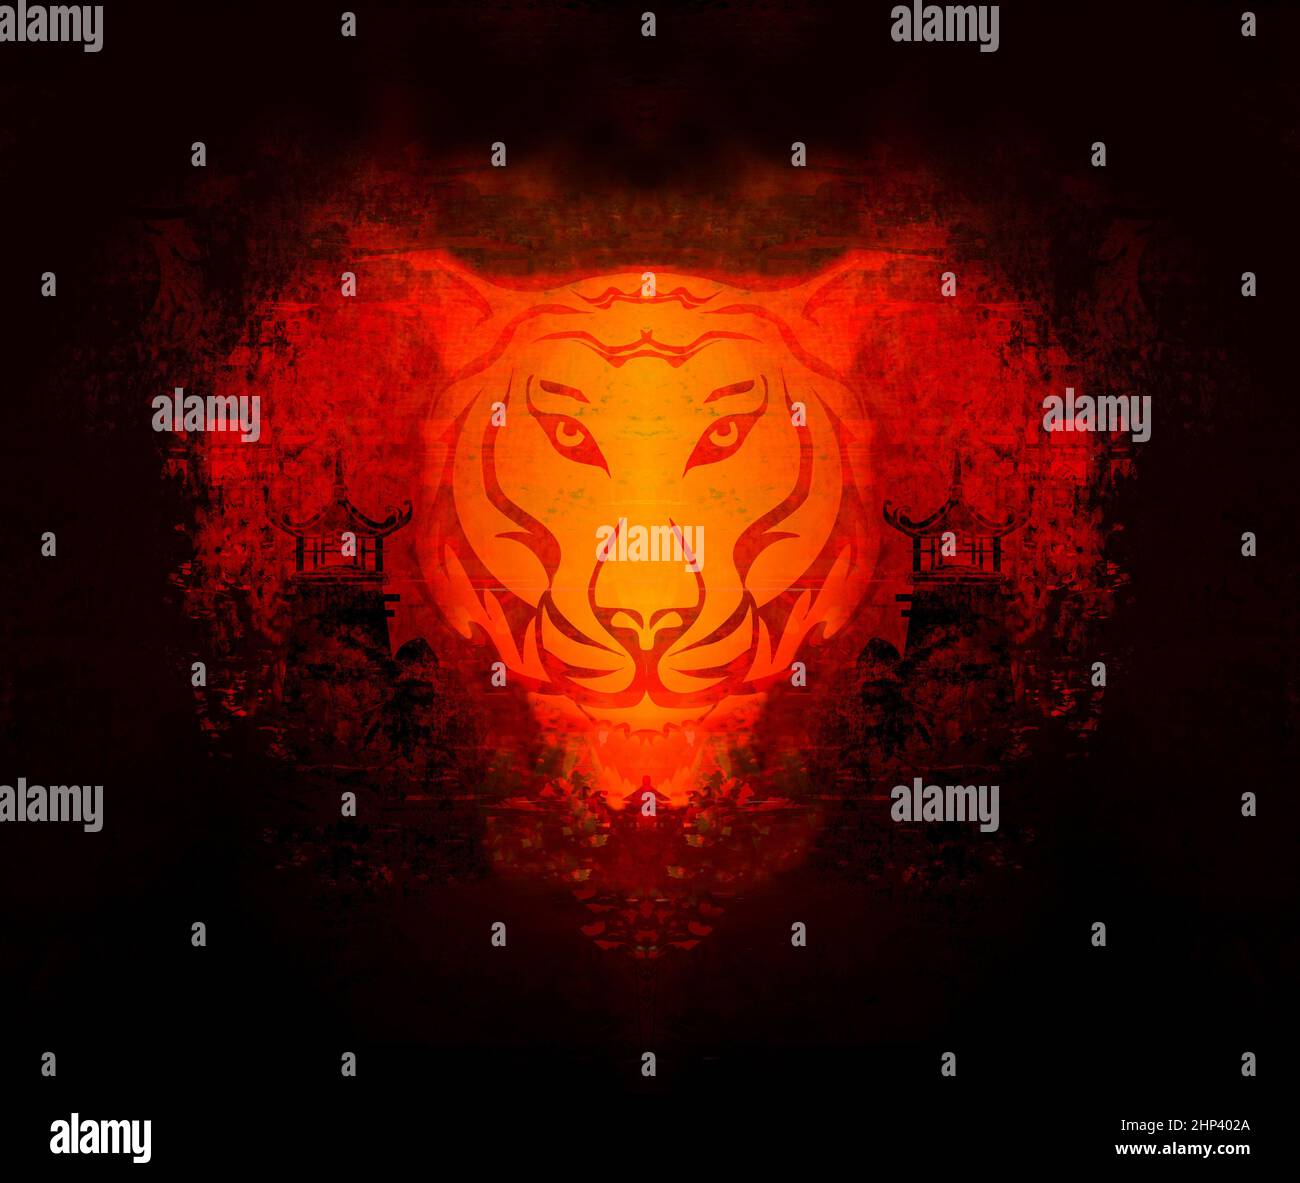 happy-new-year-2022-chinese-new-year-year-of-the-tiger-happy-lunar